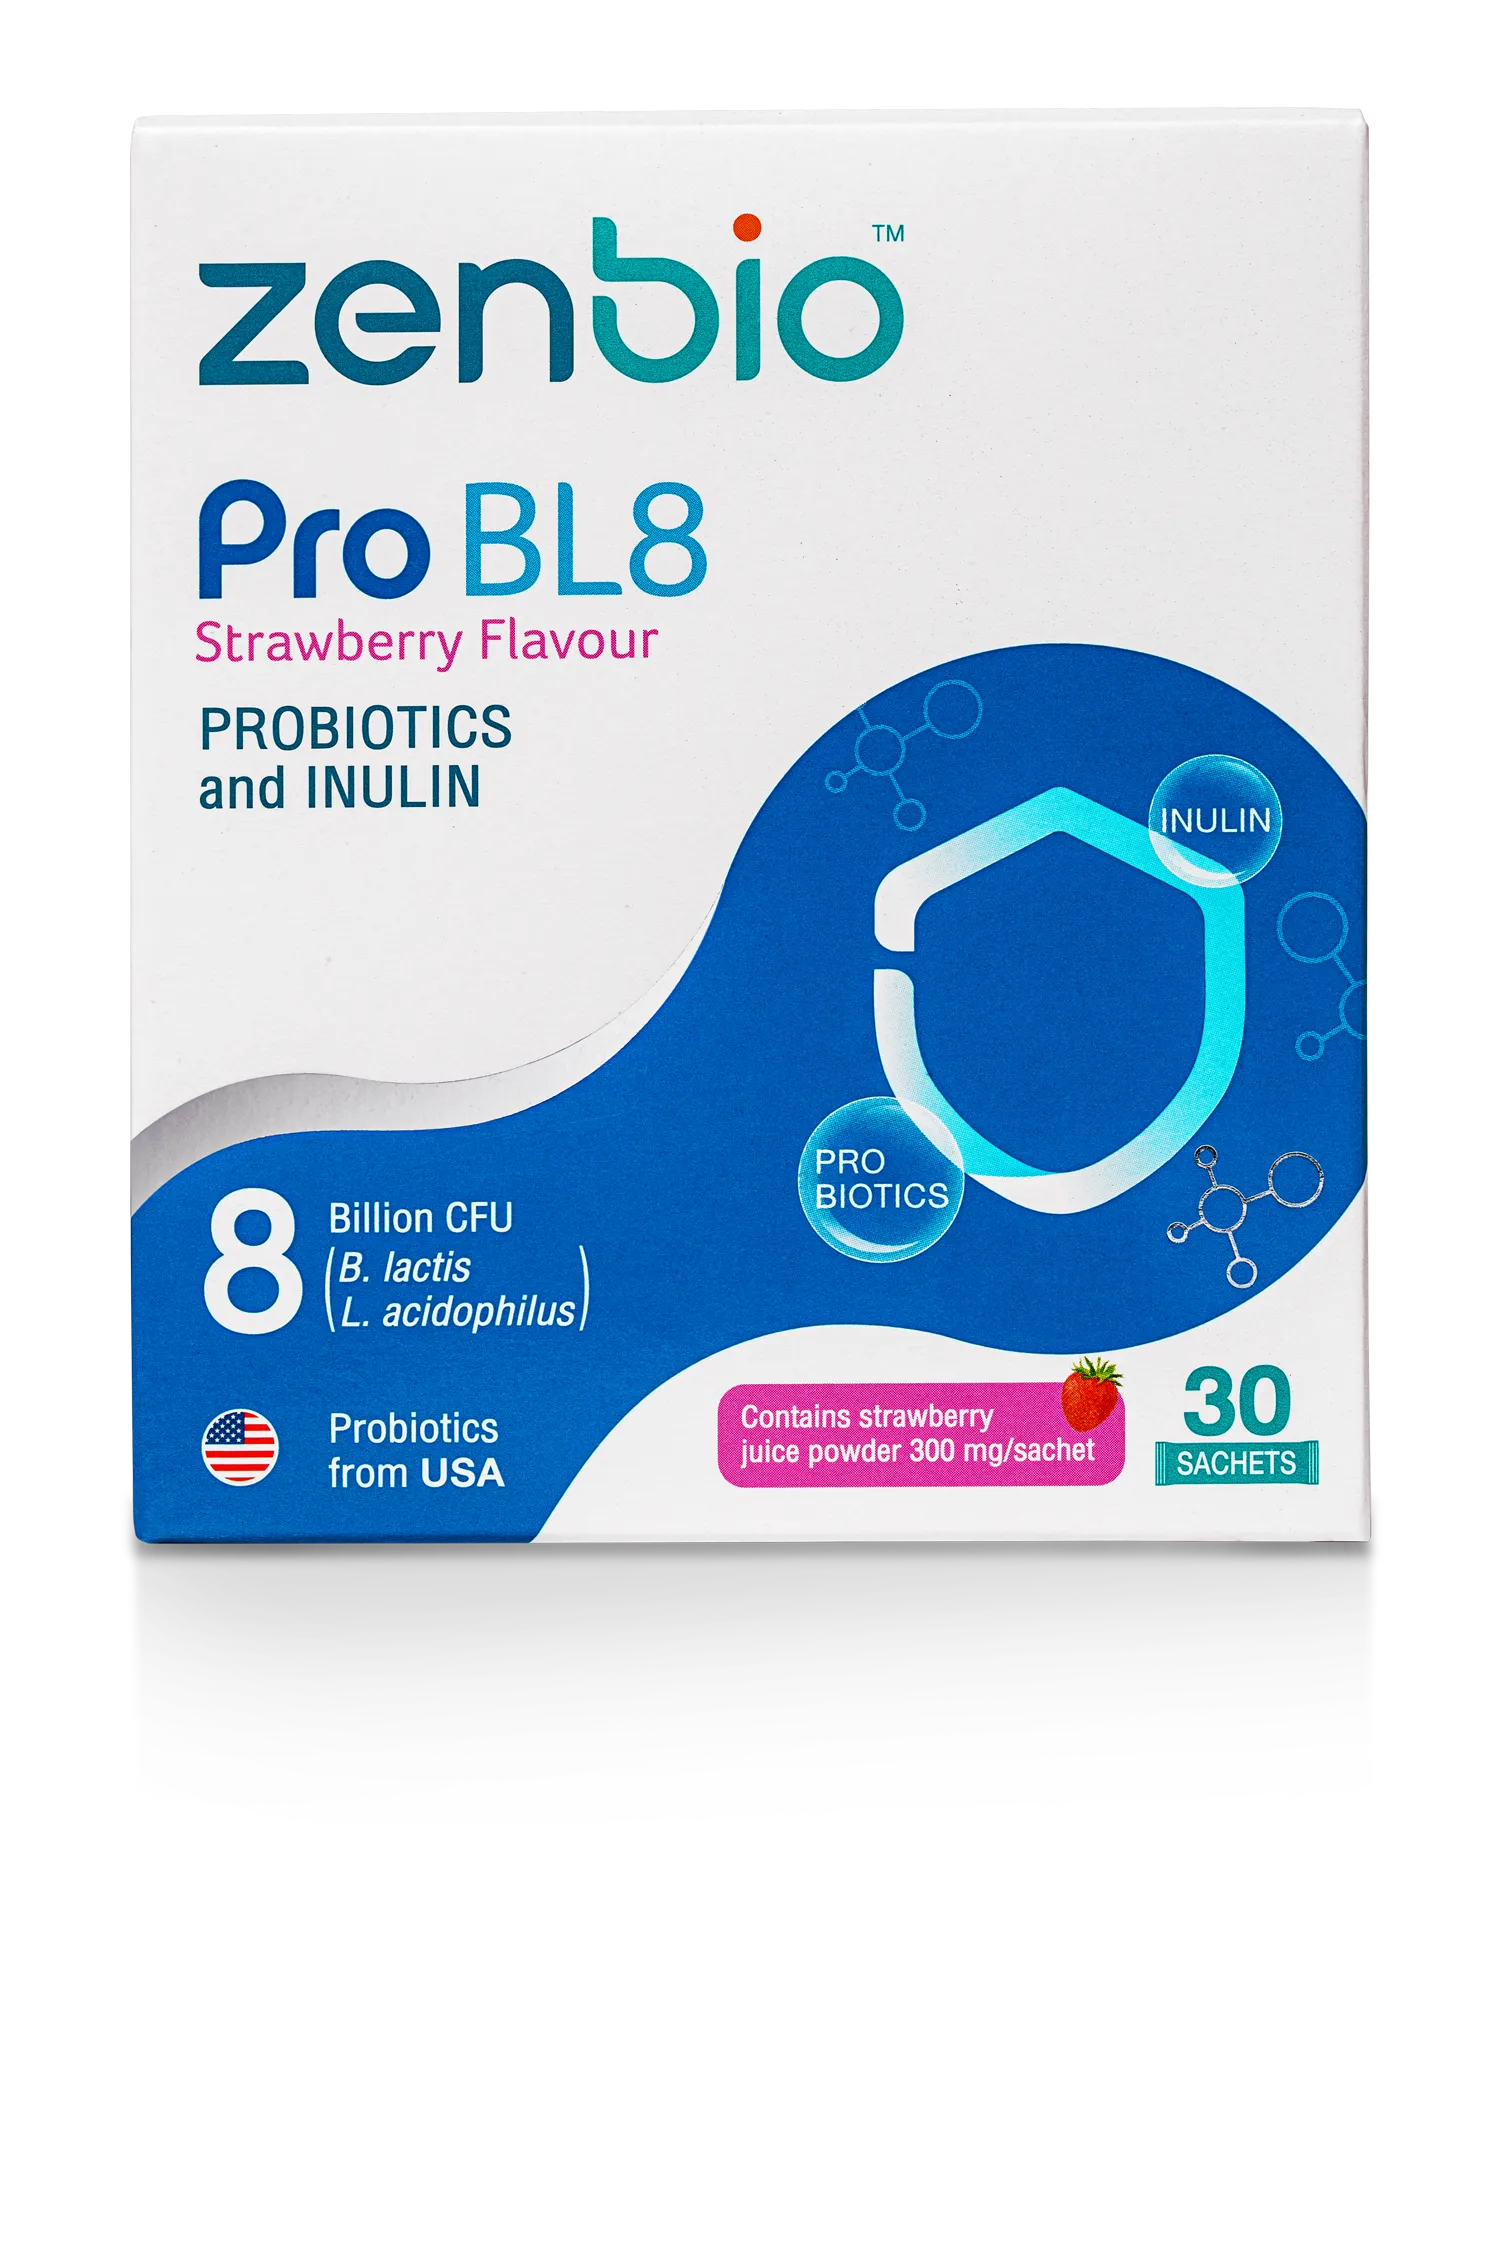 a box package of Zenbio Pro BL8, a probiotics and inulin supplement.